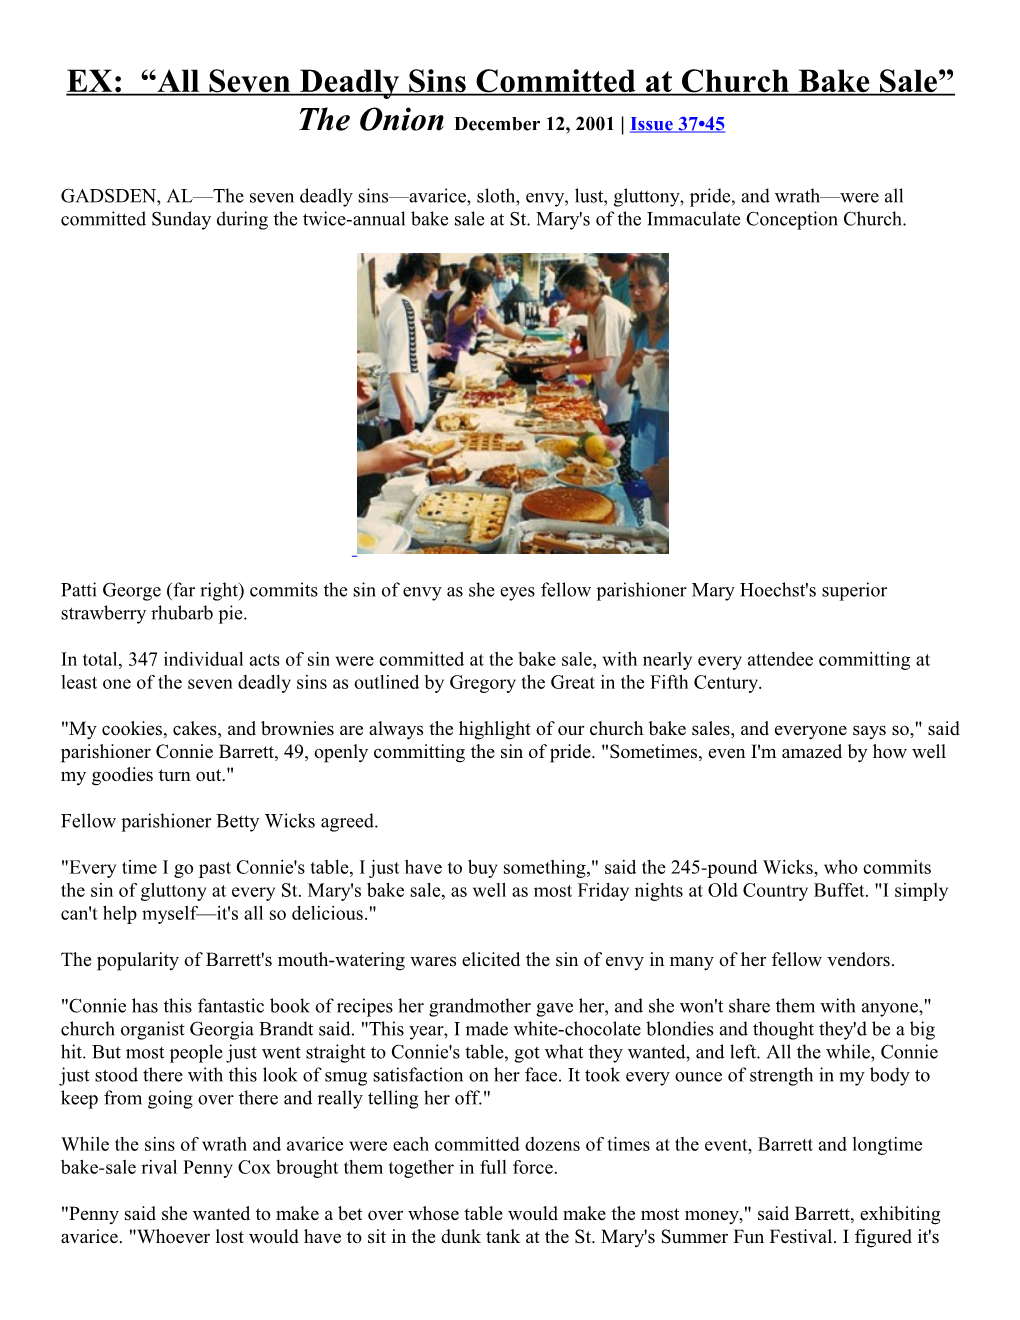 EX: All Seven Deadly Sins Committed at Church Bake Sale the Onion December 12, 2001 Issue 37 45